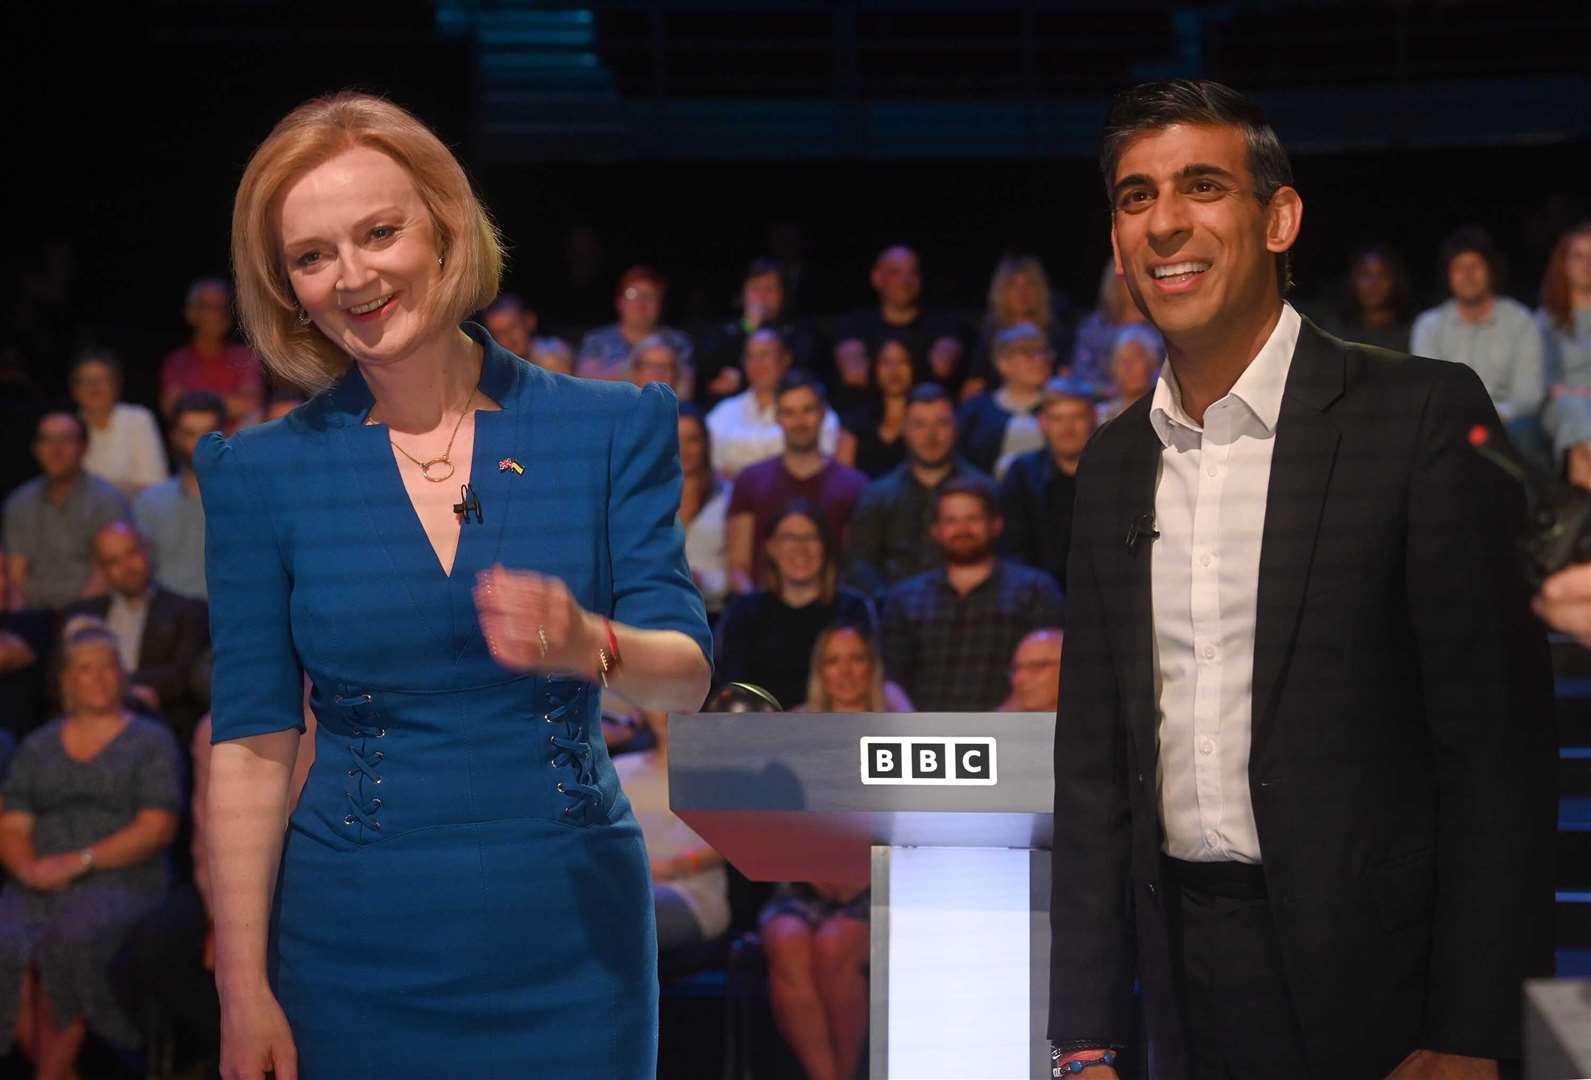 Liz Truss and Rishi Sunak before taking part in the BBC1 Conservative leadership debate (Jeff Overs/BBC)